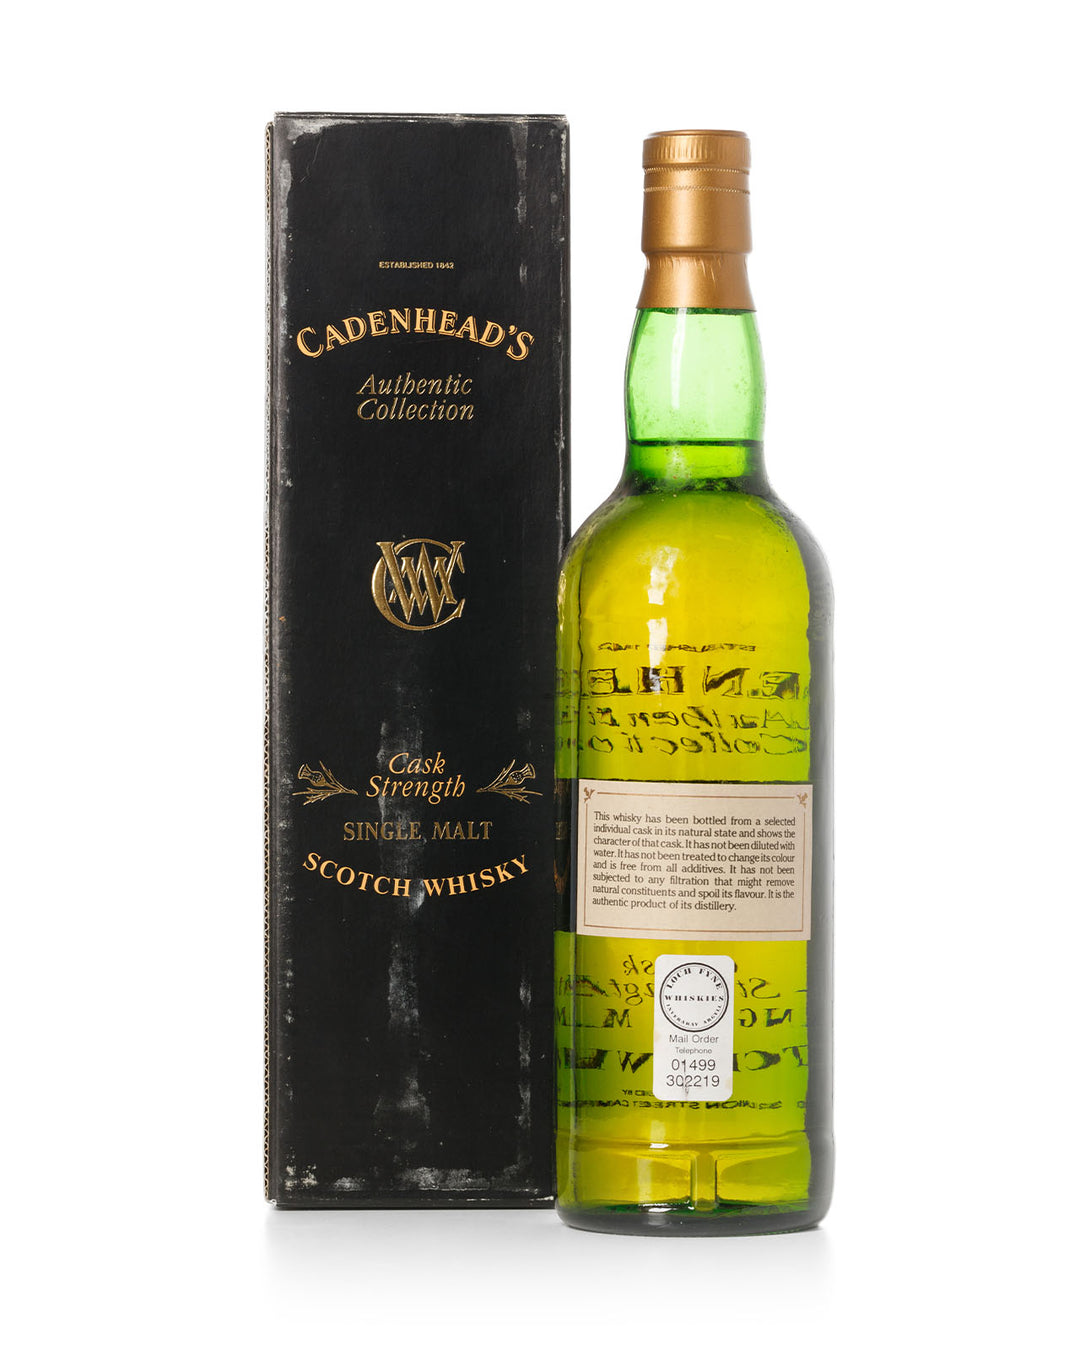 Tomatin 1976 18 Year Old Cadenheads Authentic Collection Bottled 1995 With Original Box